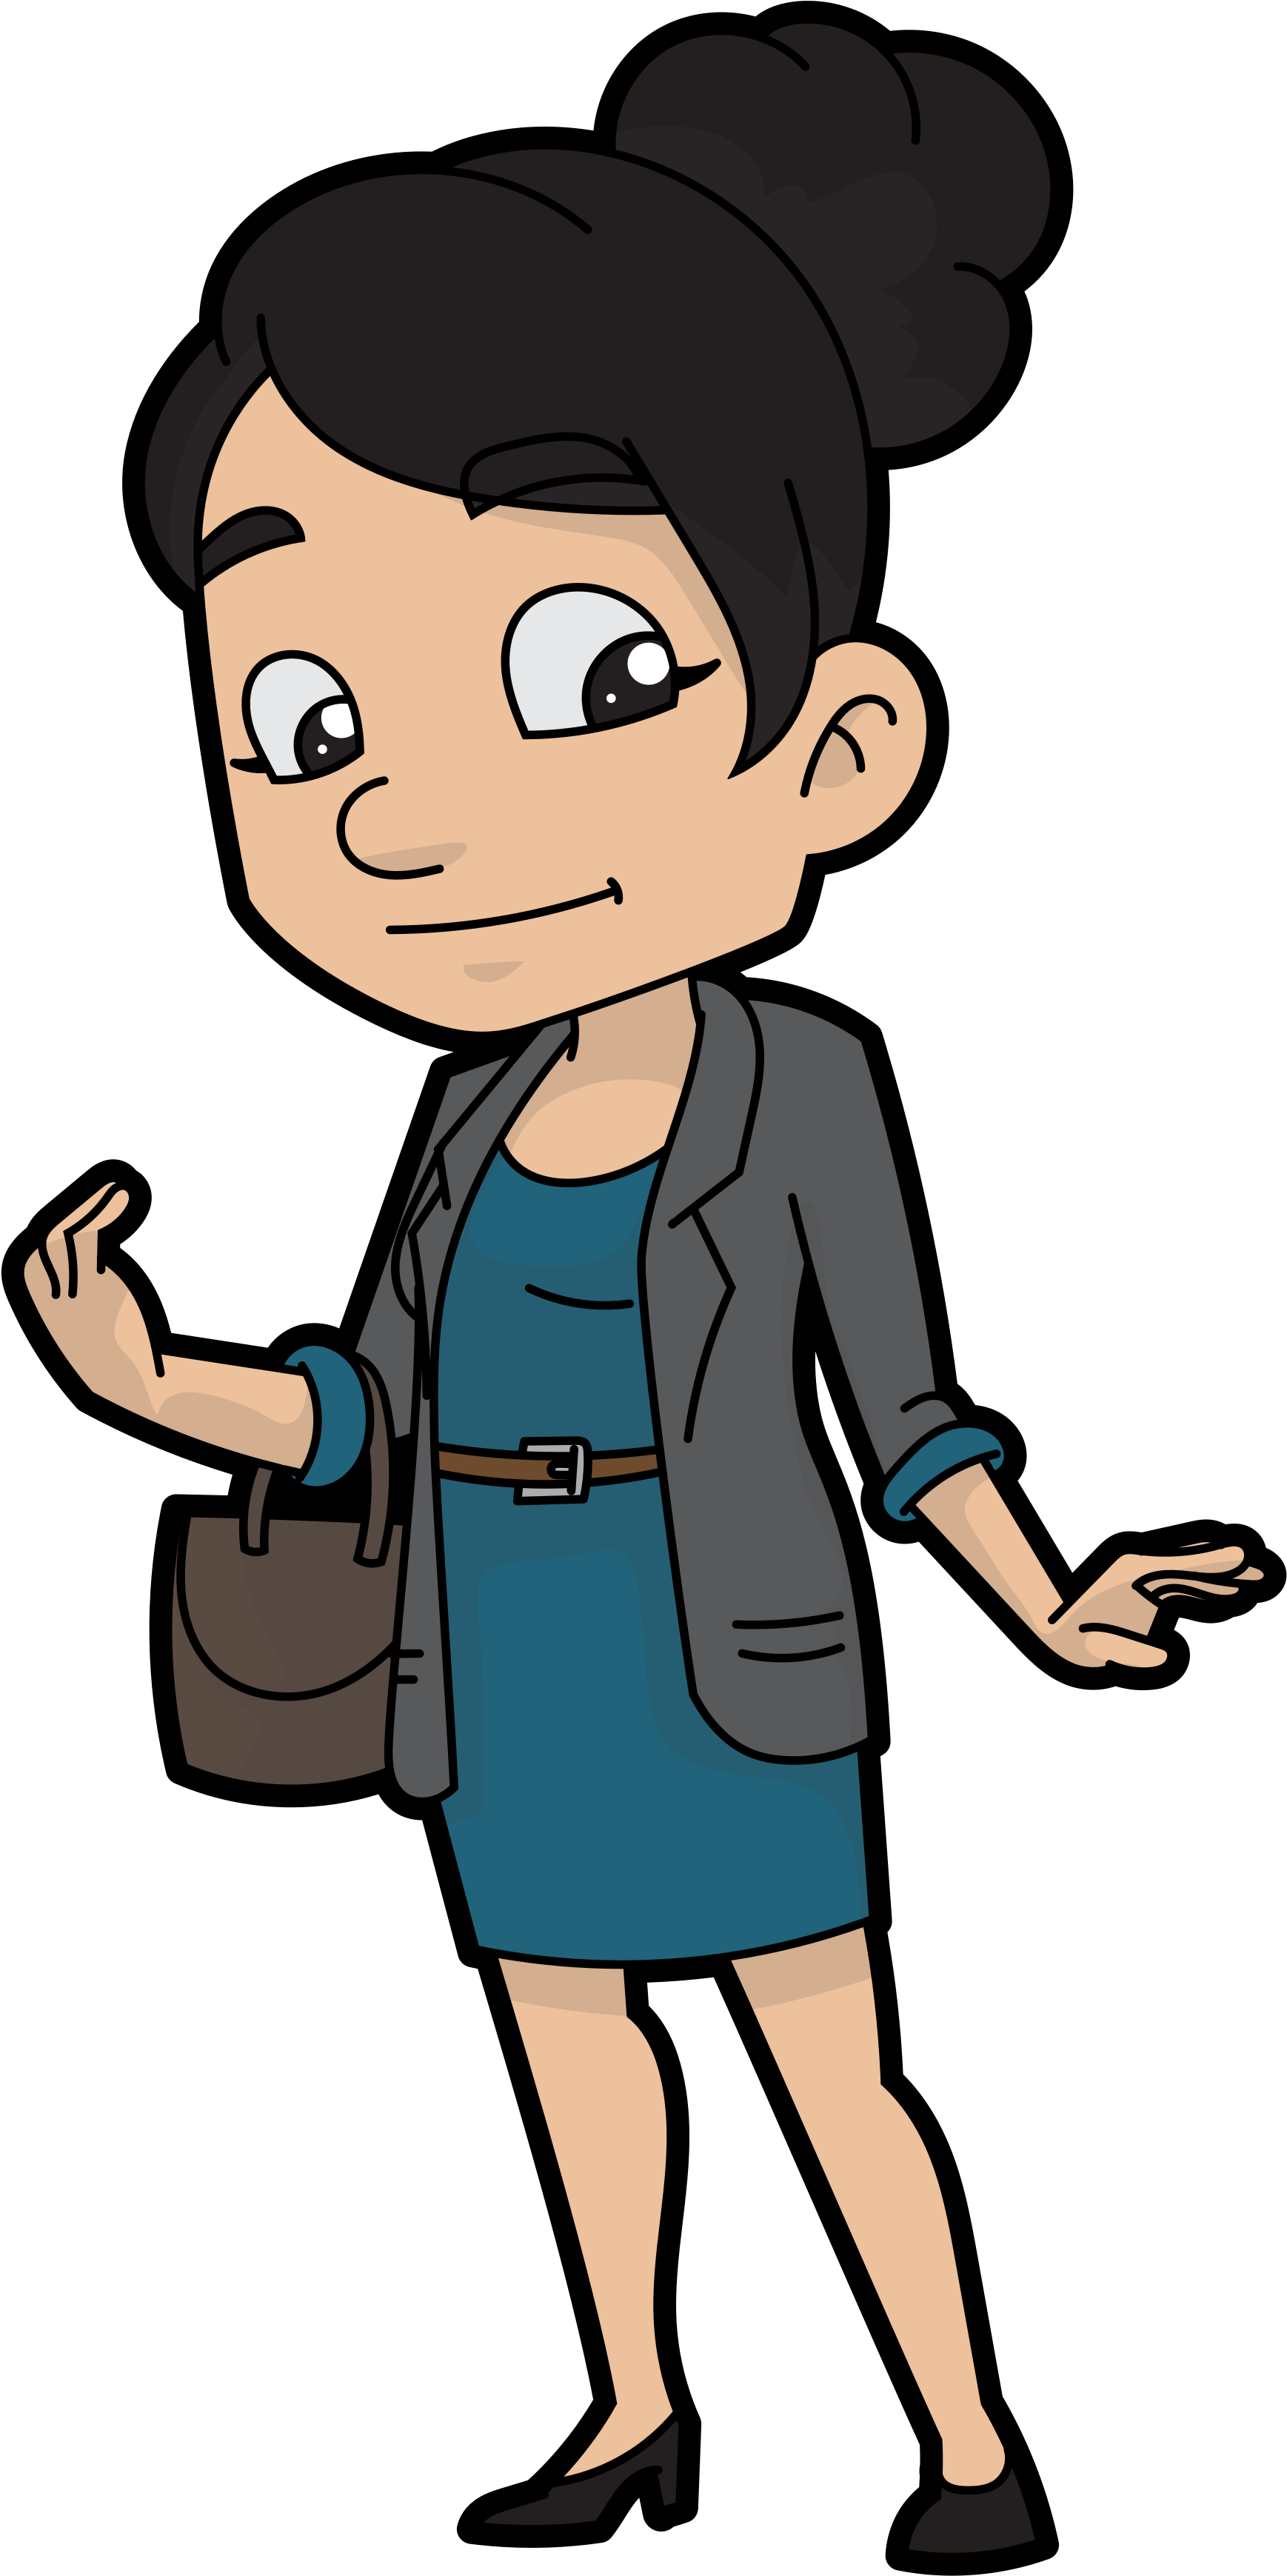 50 Year Old Woman Cartoon, Hd Png Download